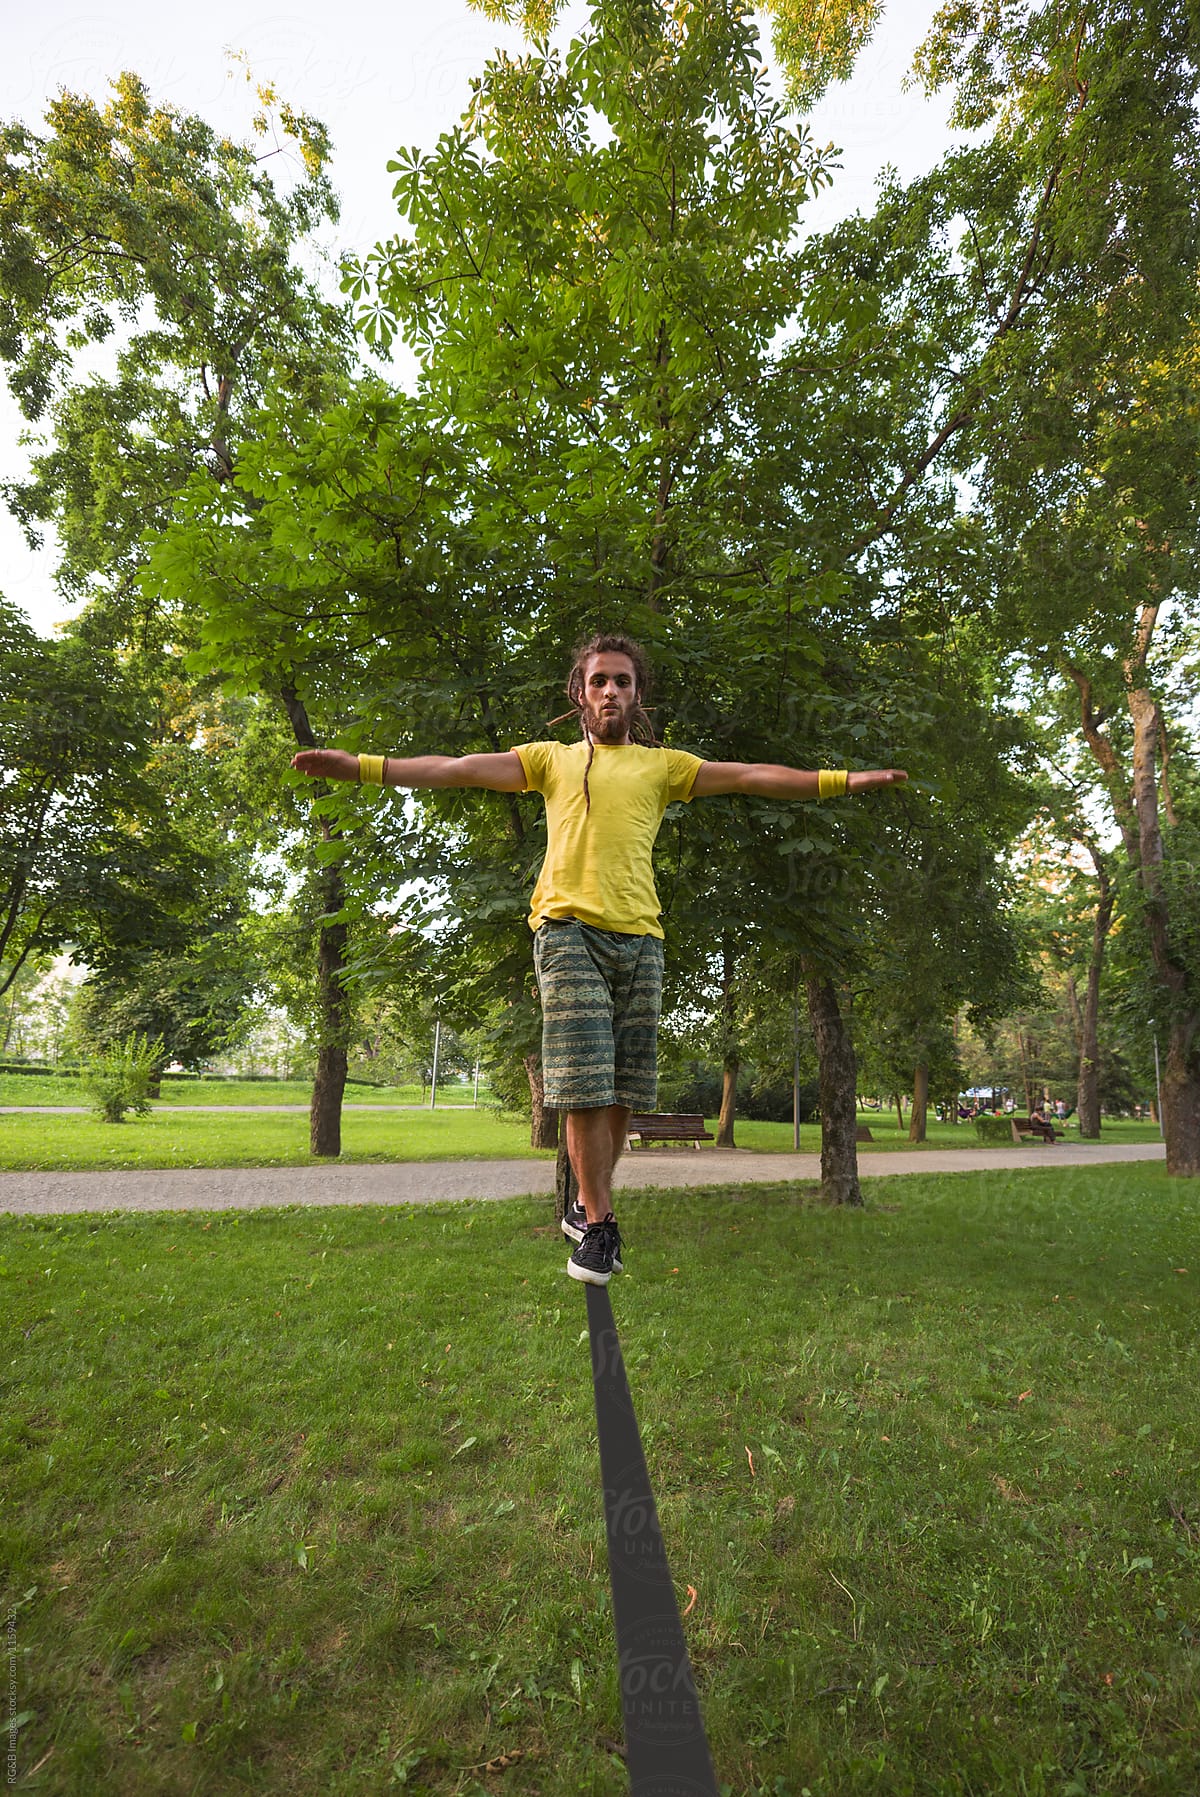 Man standing in balance on a narrow tightrope in the park